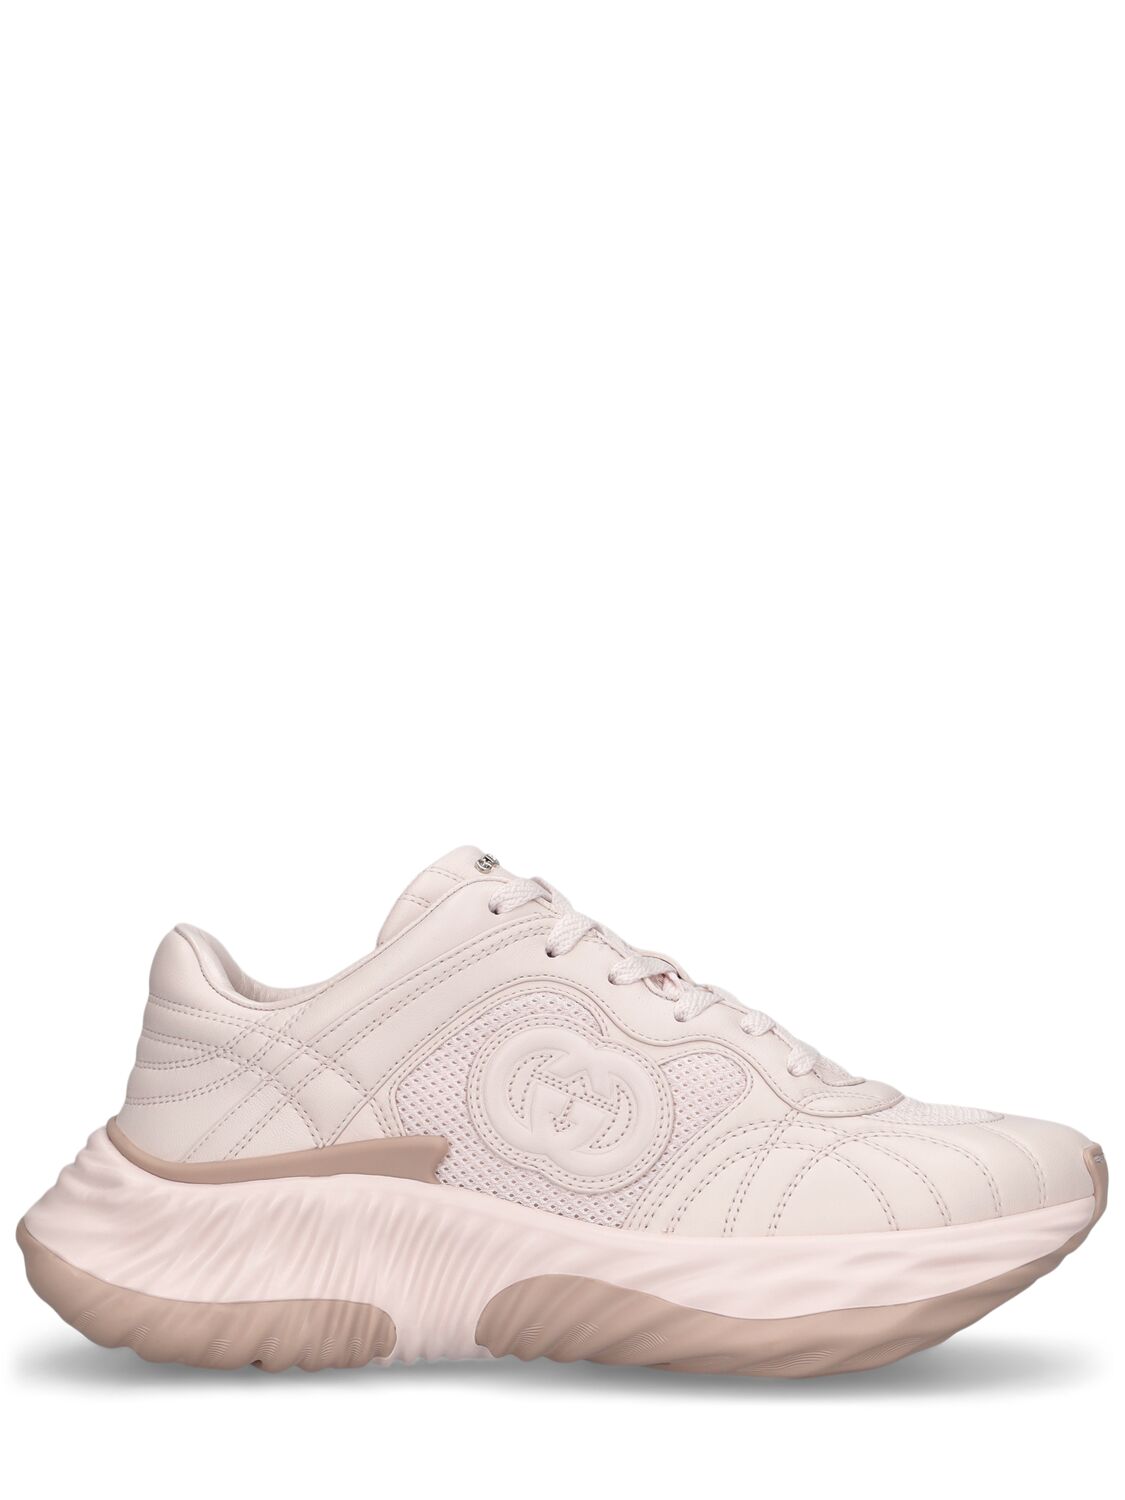 Gucci 65mm Ripple Leather Trainers In Pink